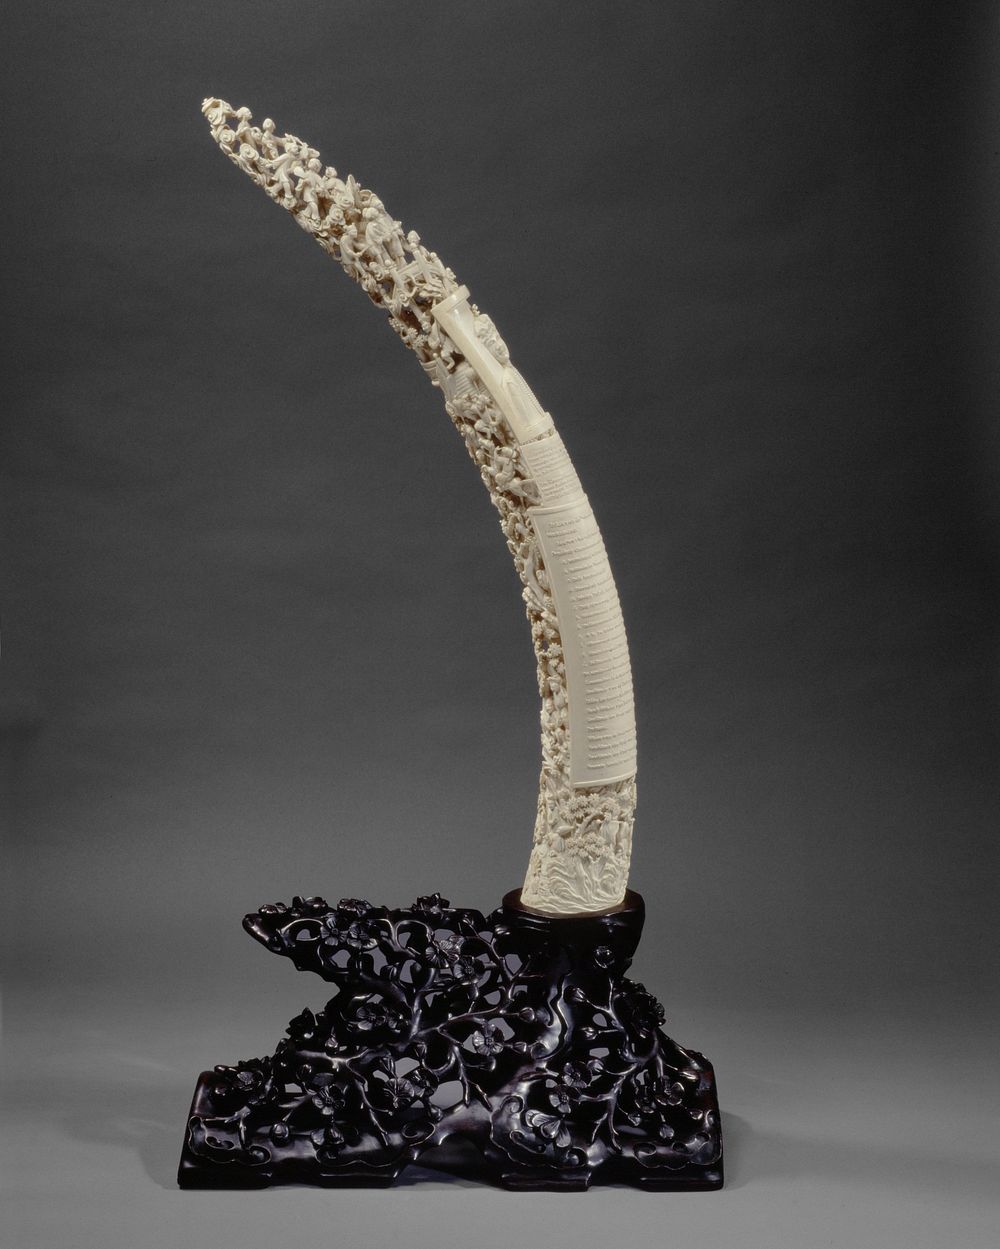 Carved elephant tusk gift to Annie Hermine Cremer-Hogan (c. 1919) by anonymous